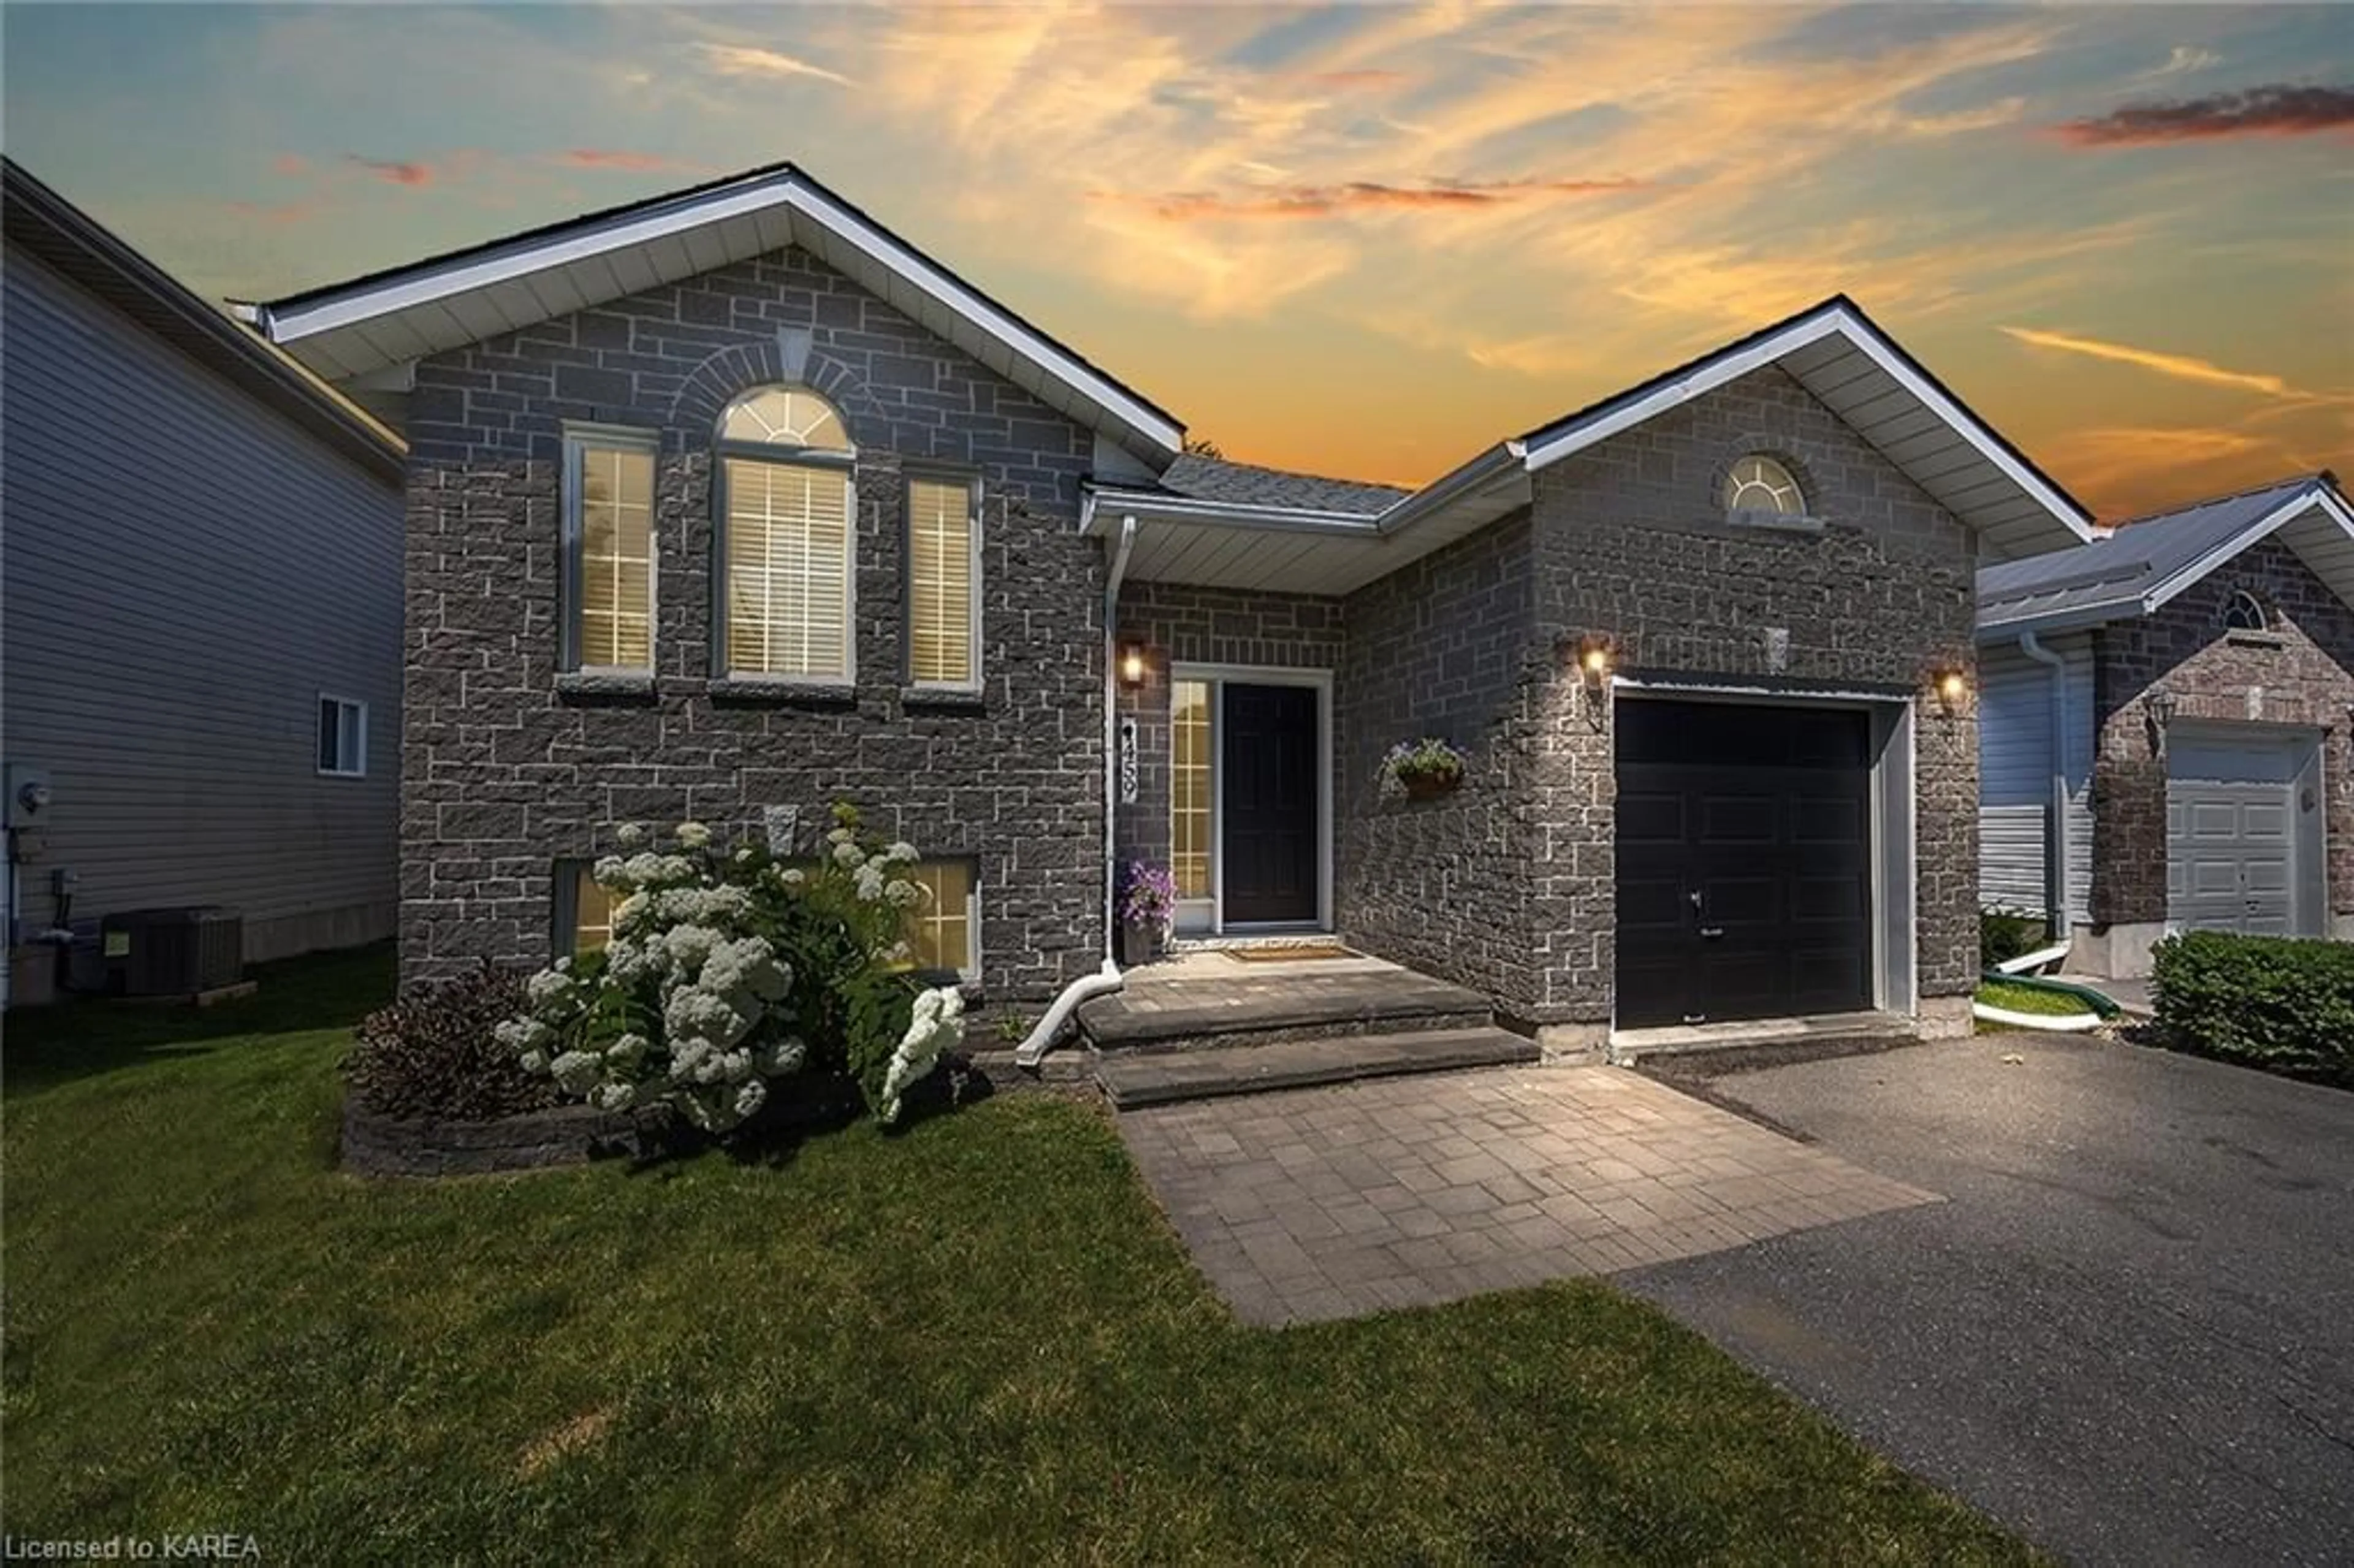 Home with brick exterior material for 1459 Birchwood Dr, Kingston Ontario K7P 3H3